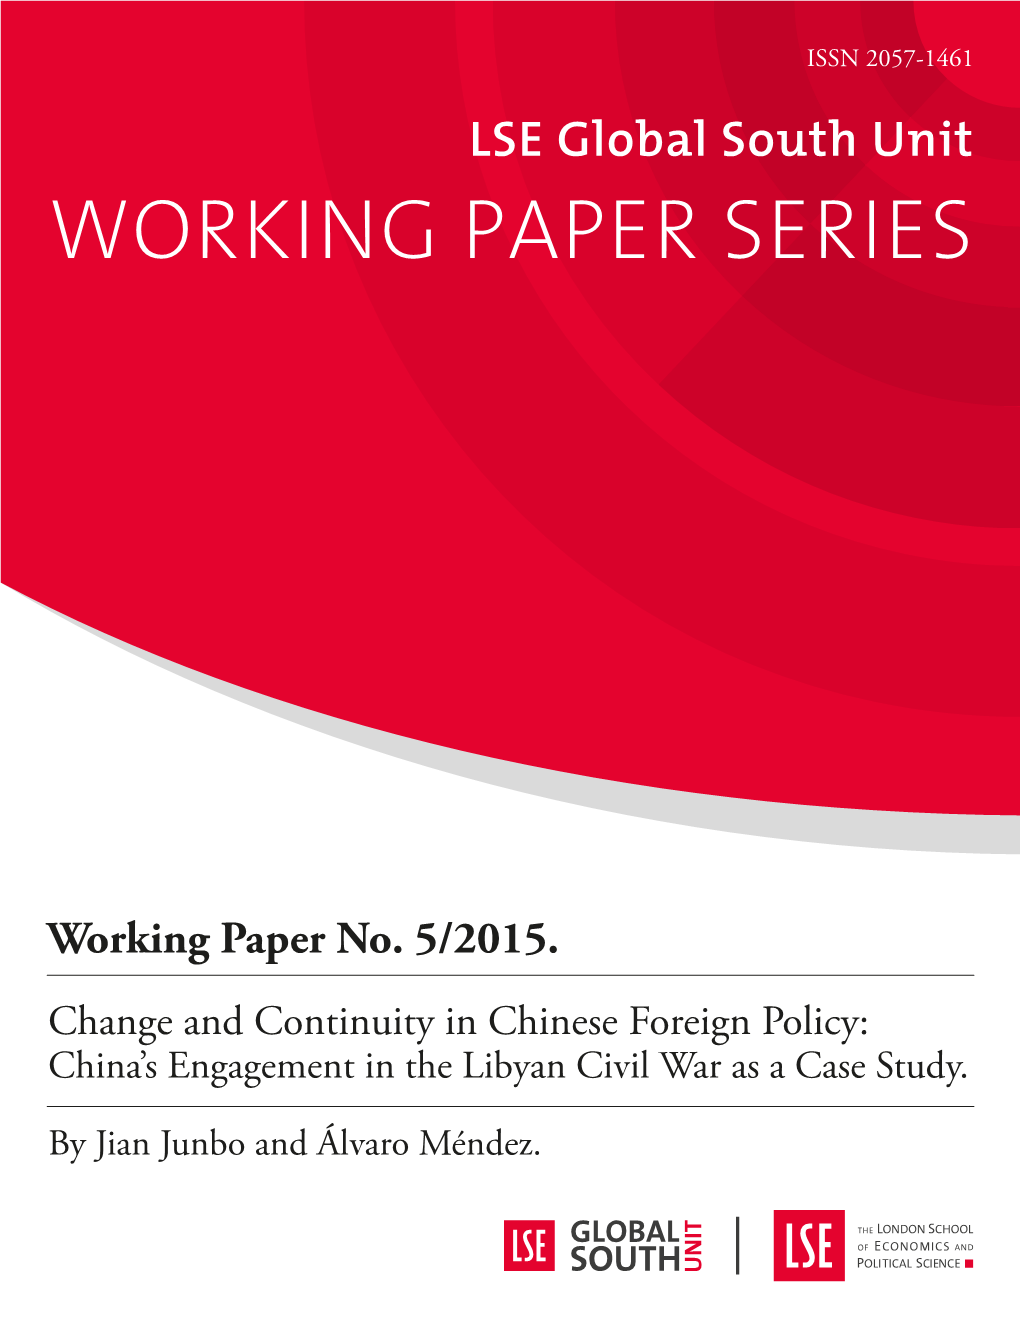 China's Engagement in the Libyan Civil War As A